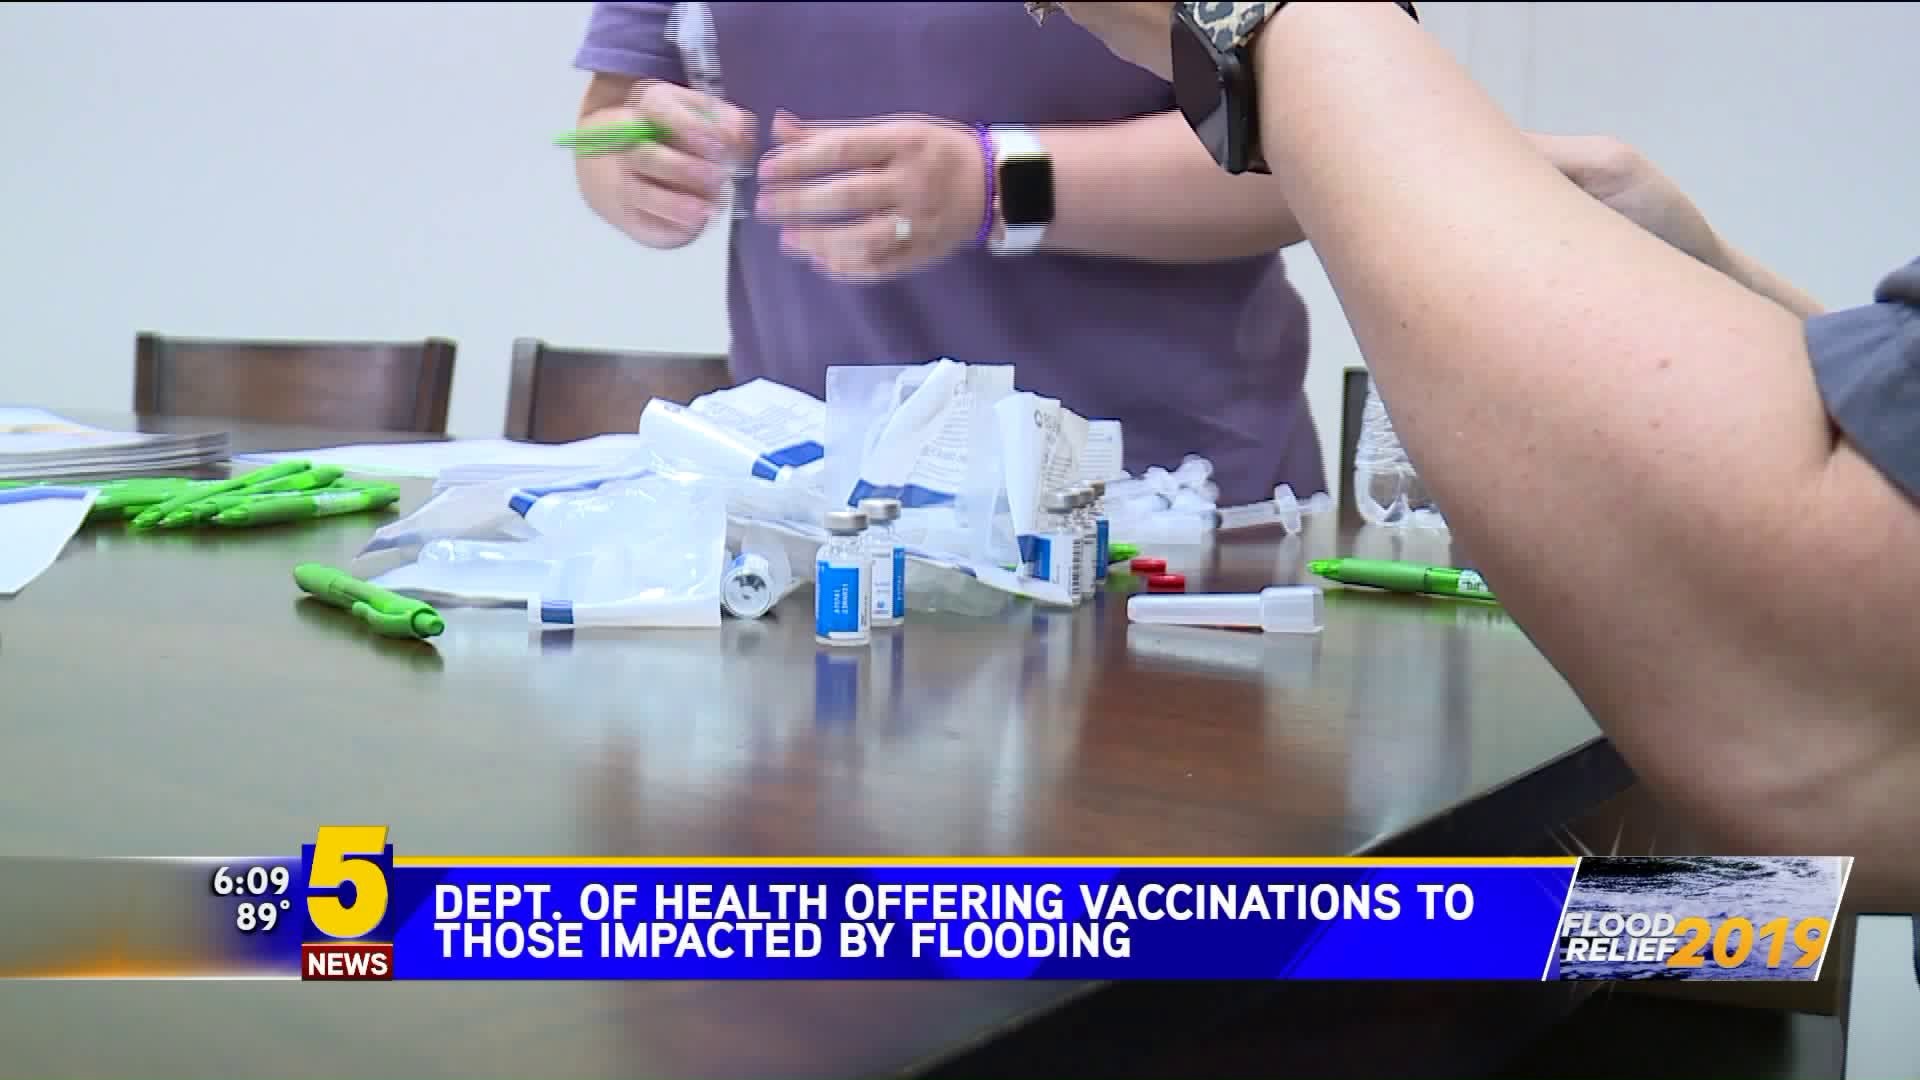 Dept. of Health Offering Vaccinations to Those Affected by Flood